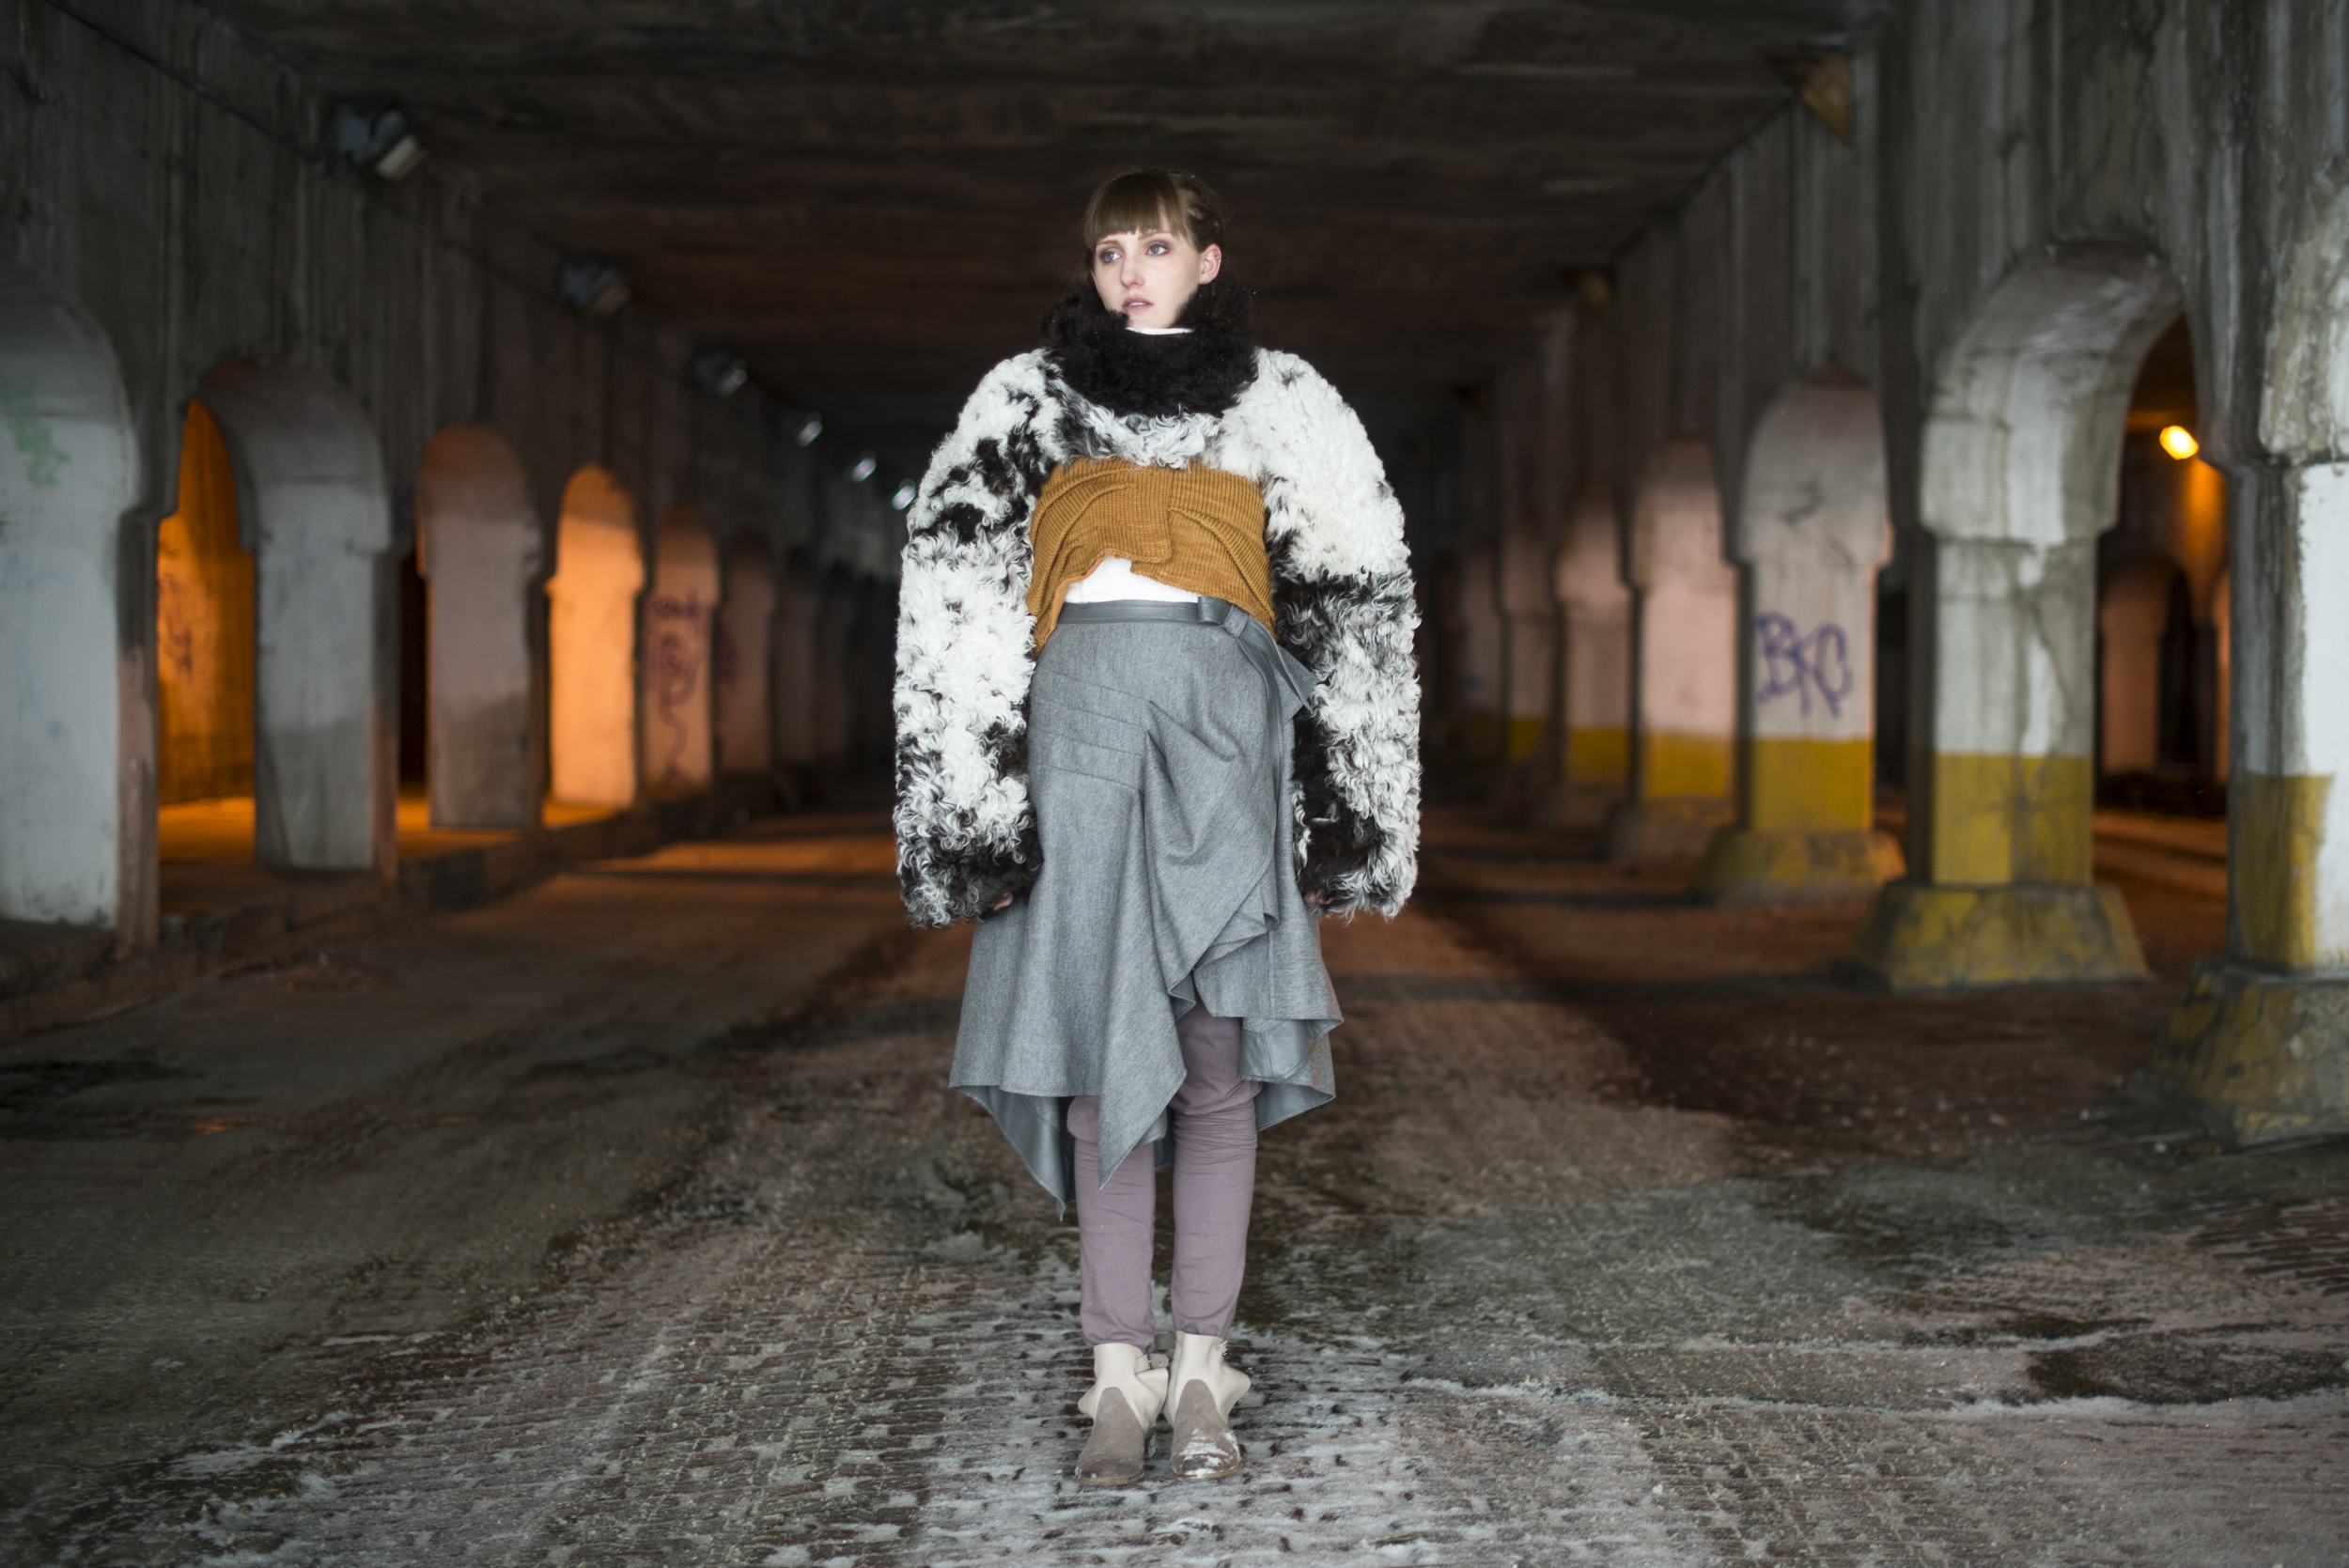 Sheepskin and knit coat, leather and wool skirt, and knit leggings